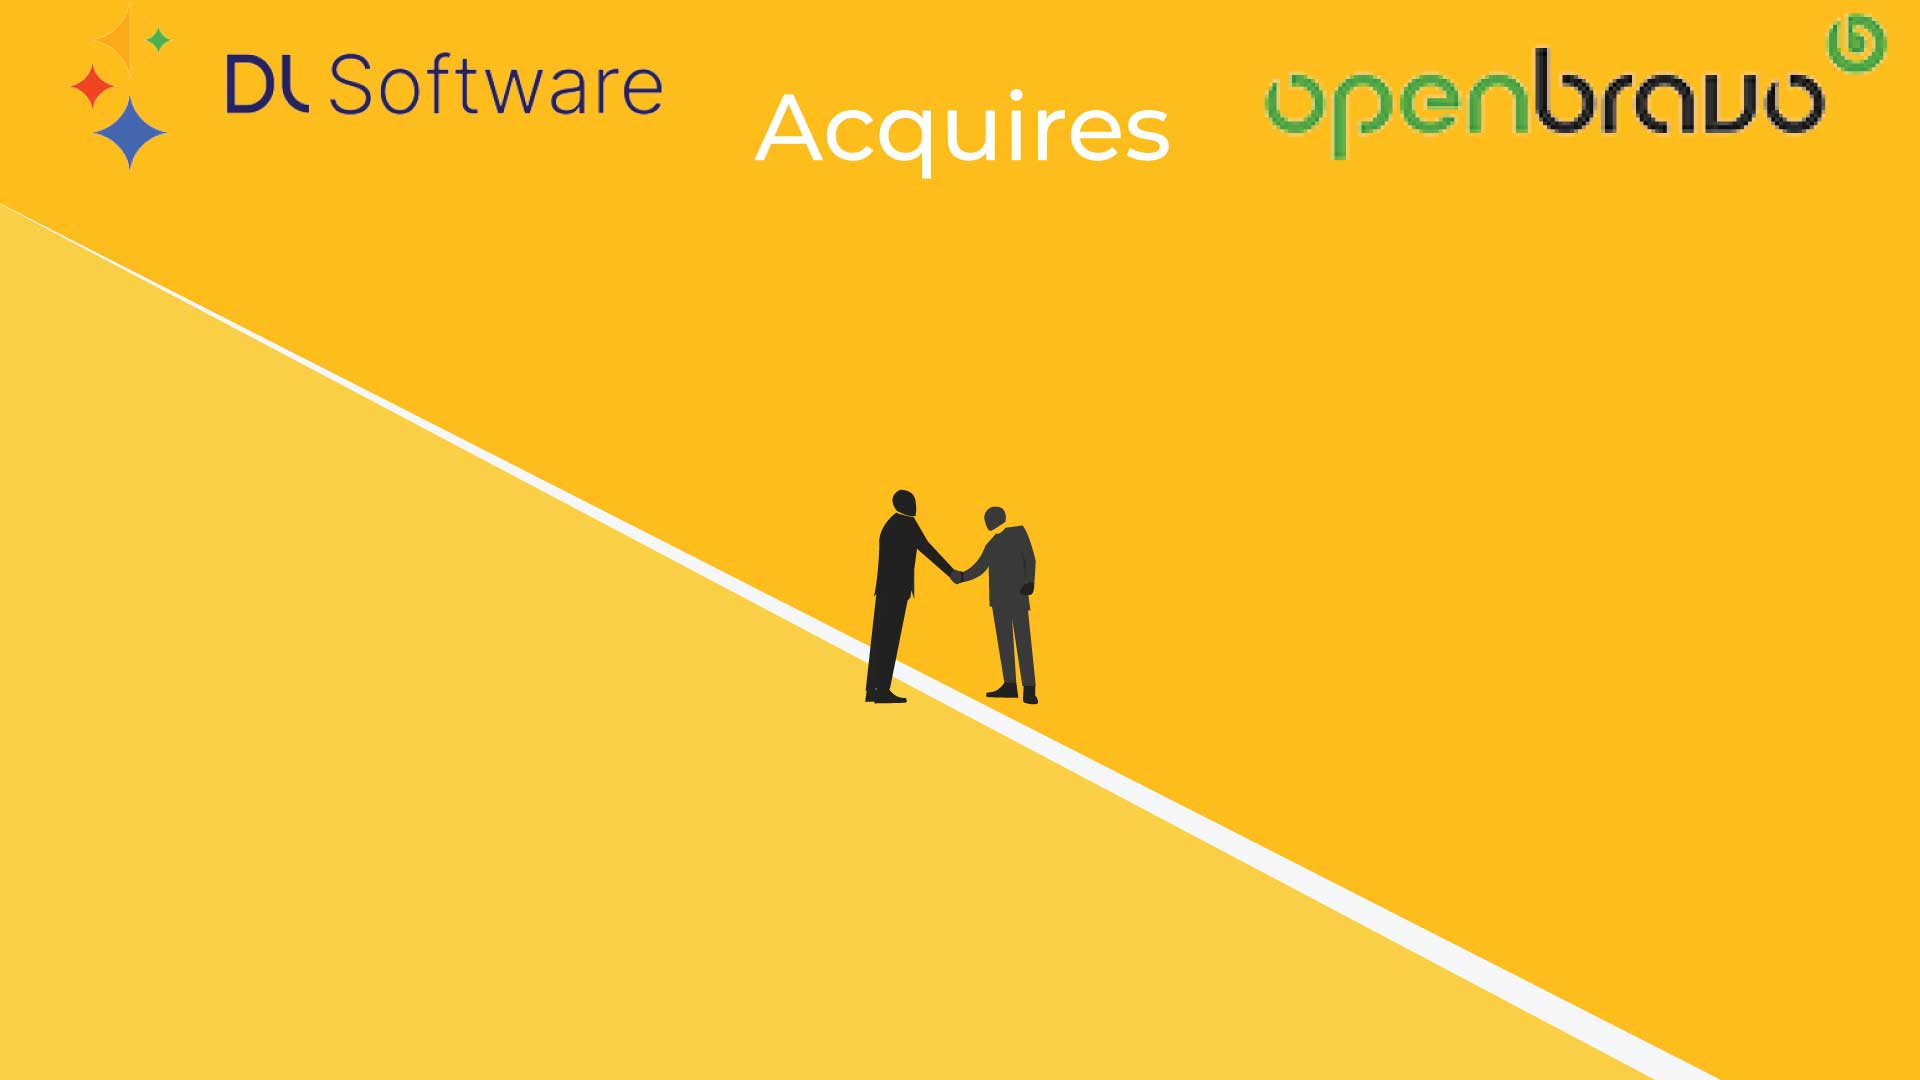 Openbravo announces its acquisition by leading French group DL Software